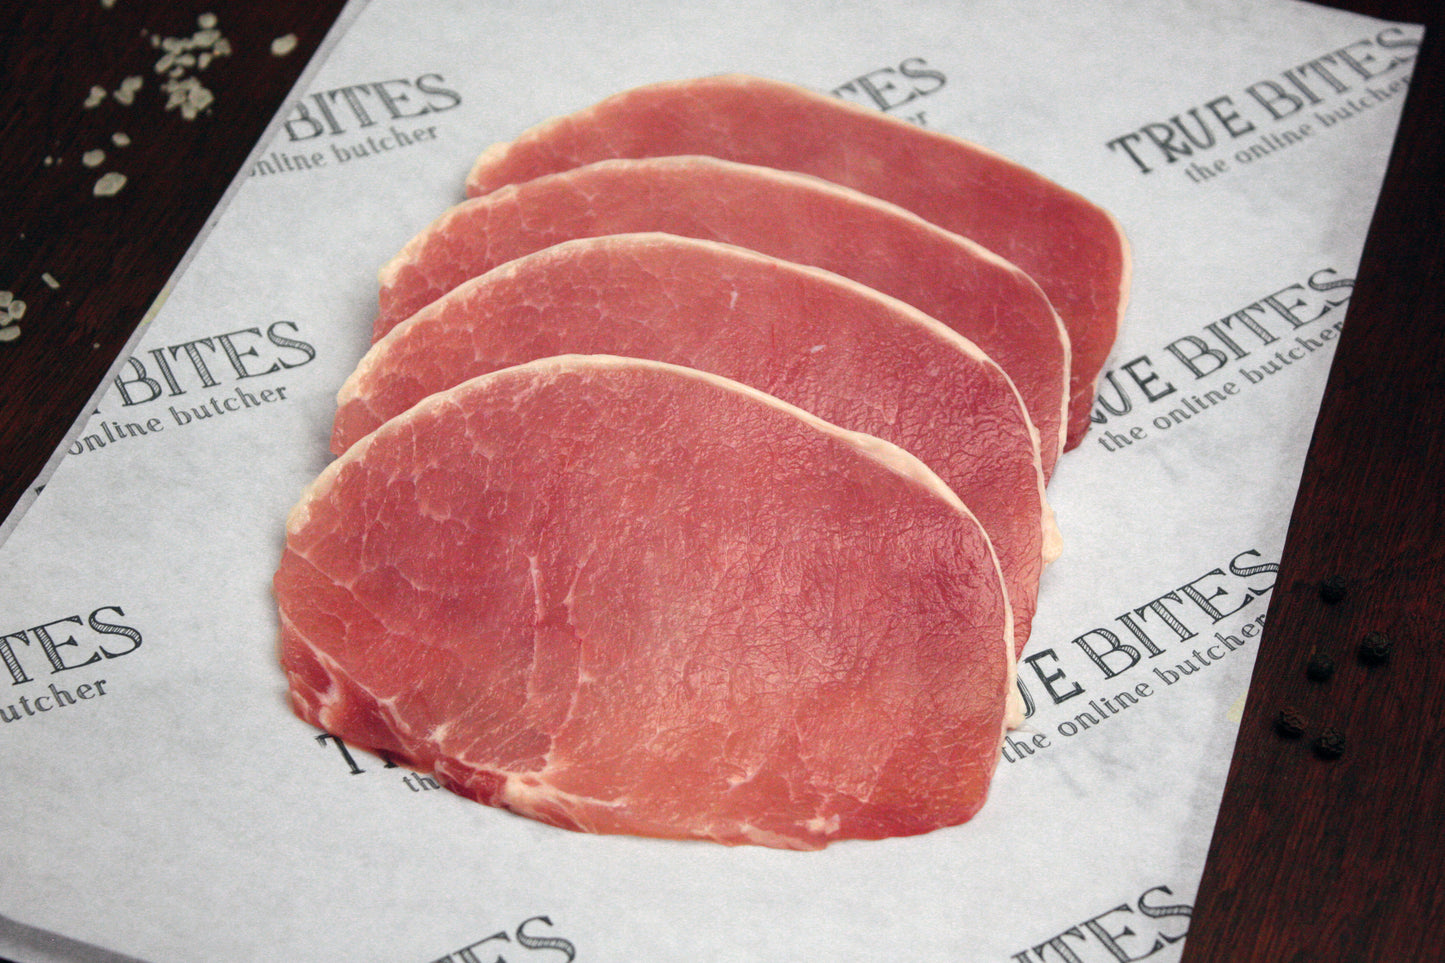 bacon medallions displayed on true bites branded greaseproof paper